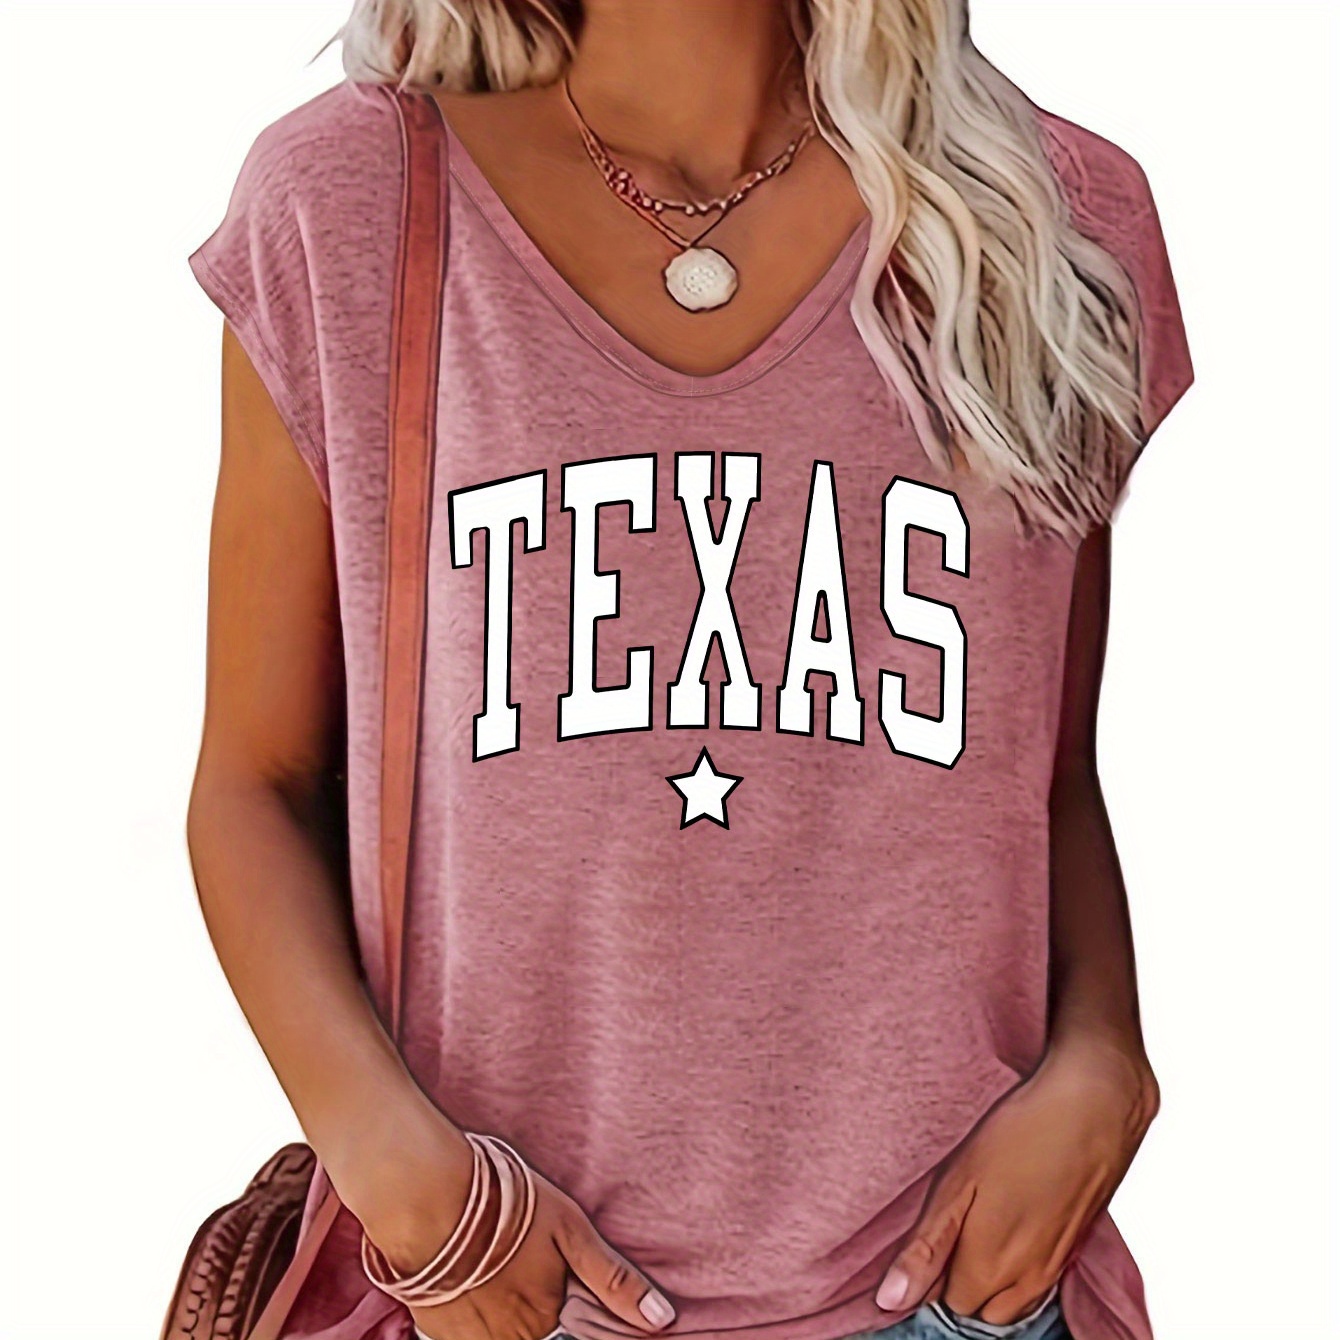 

Texas Print Cap Sleeve Top, Casual V-neck Top For Summer & Spring, Women's Clothing